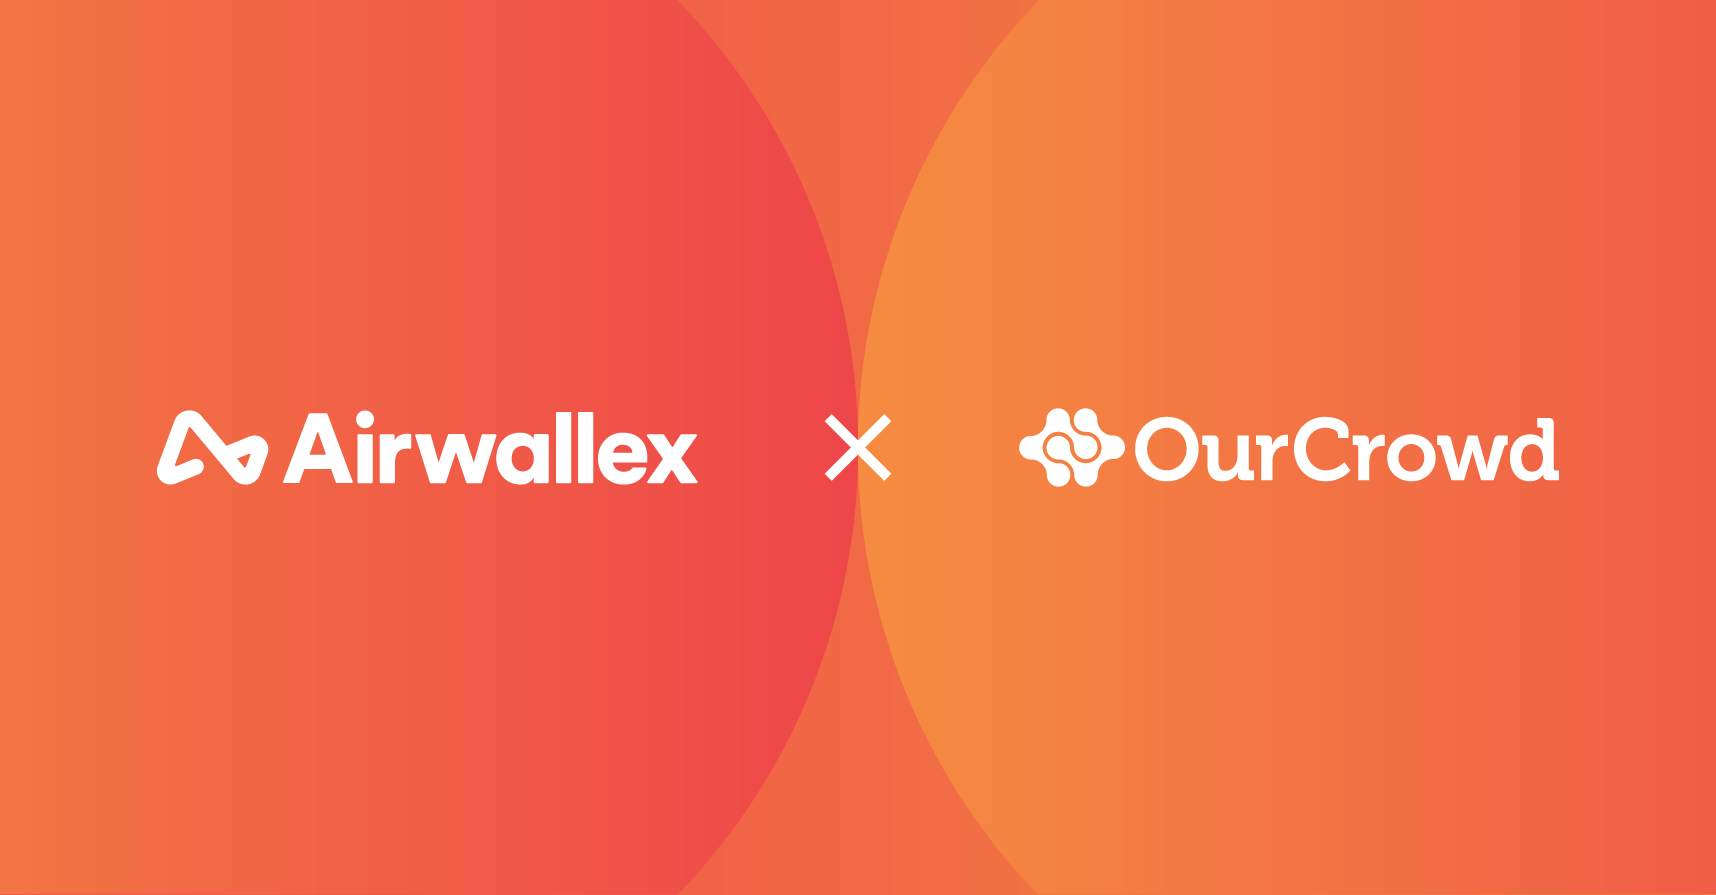 Airwallex and OurCrowd partner to make it easier to invest in global startups